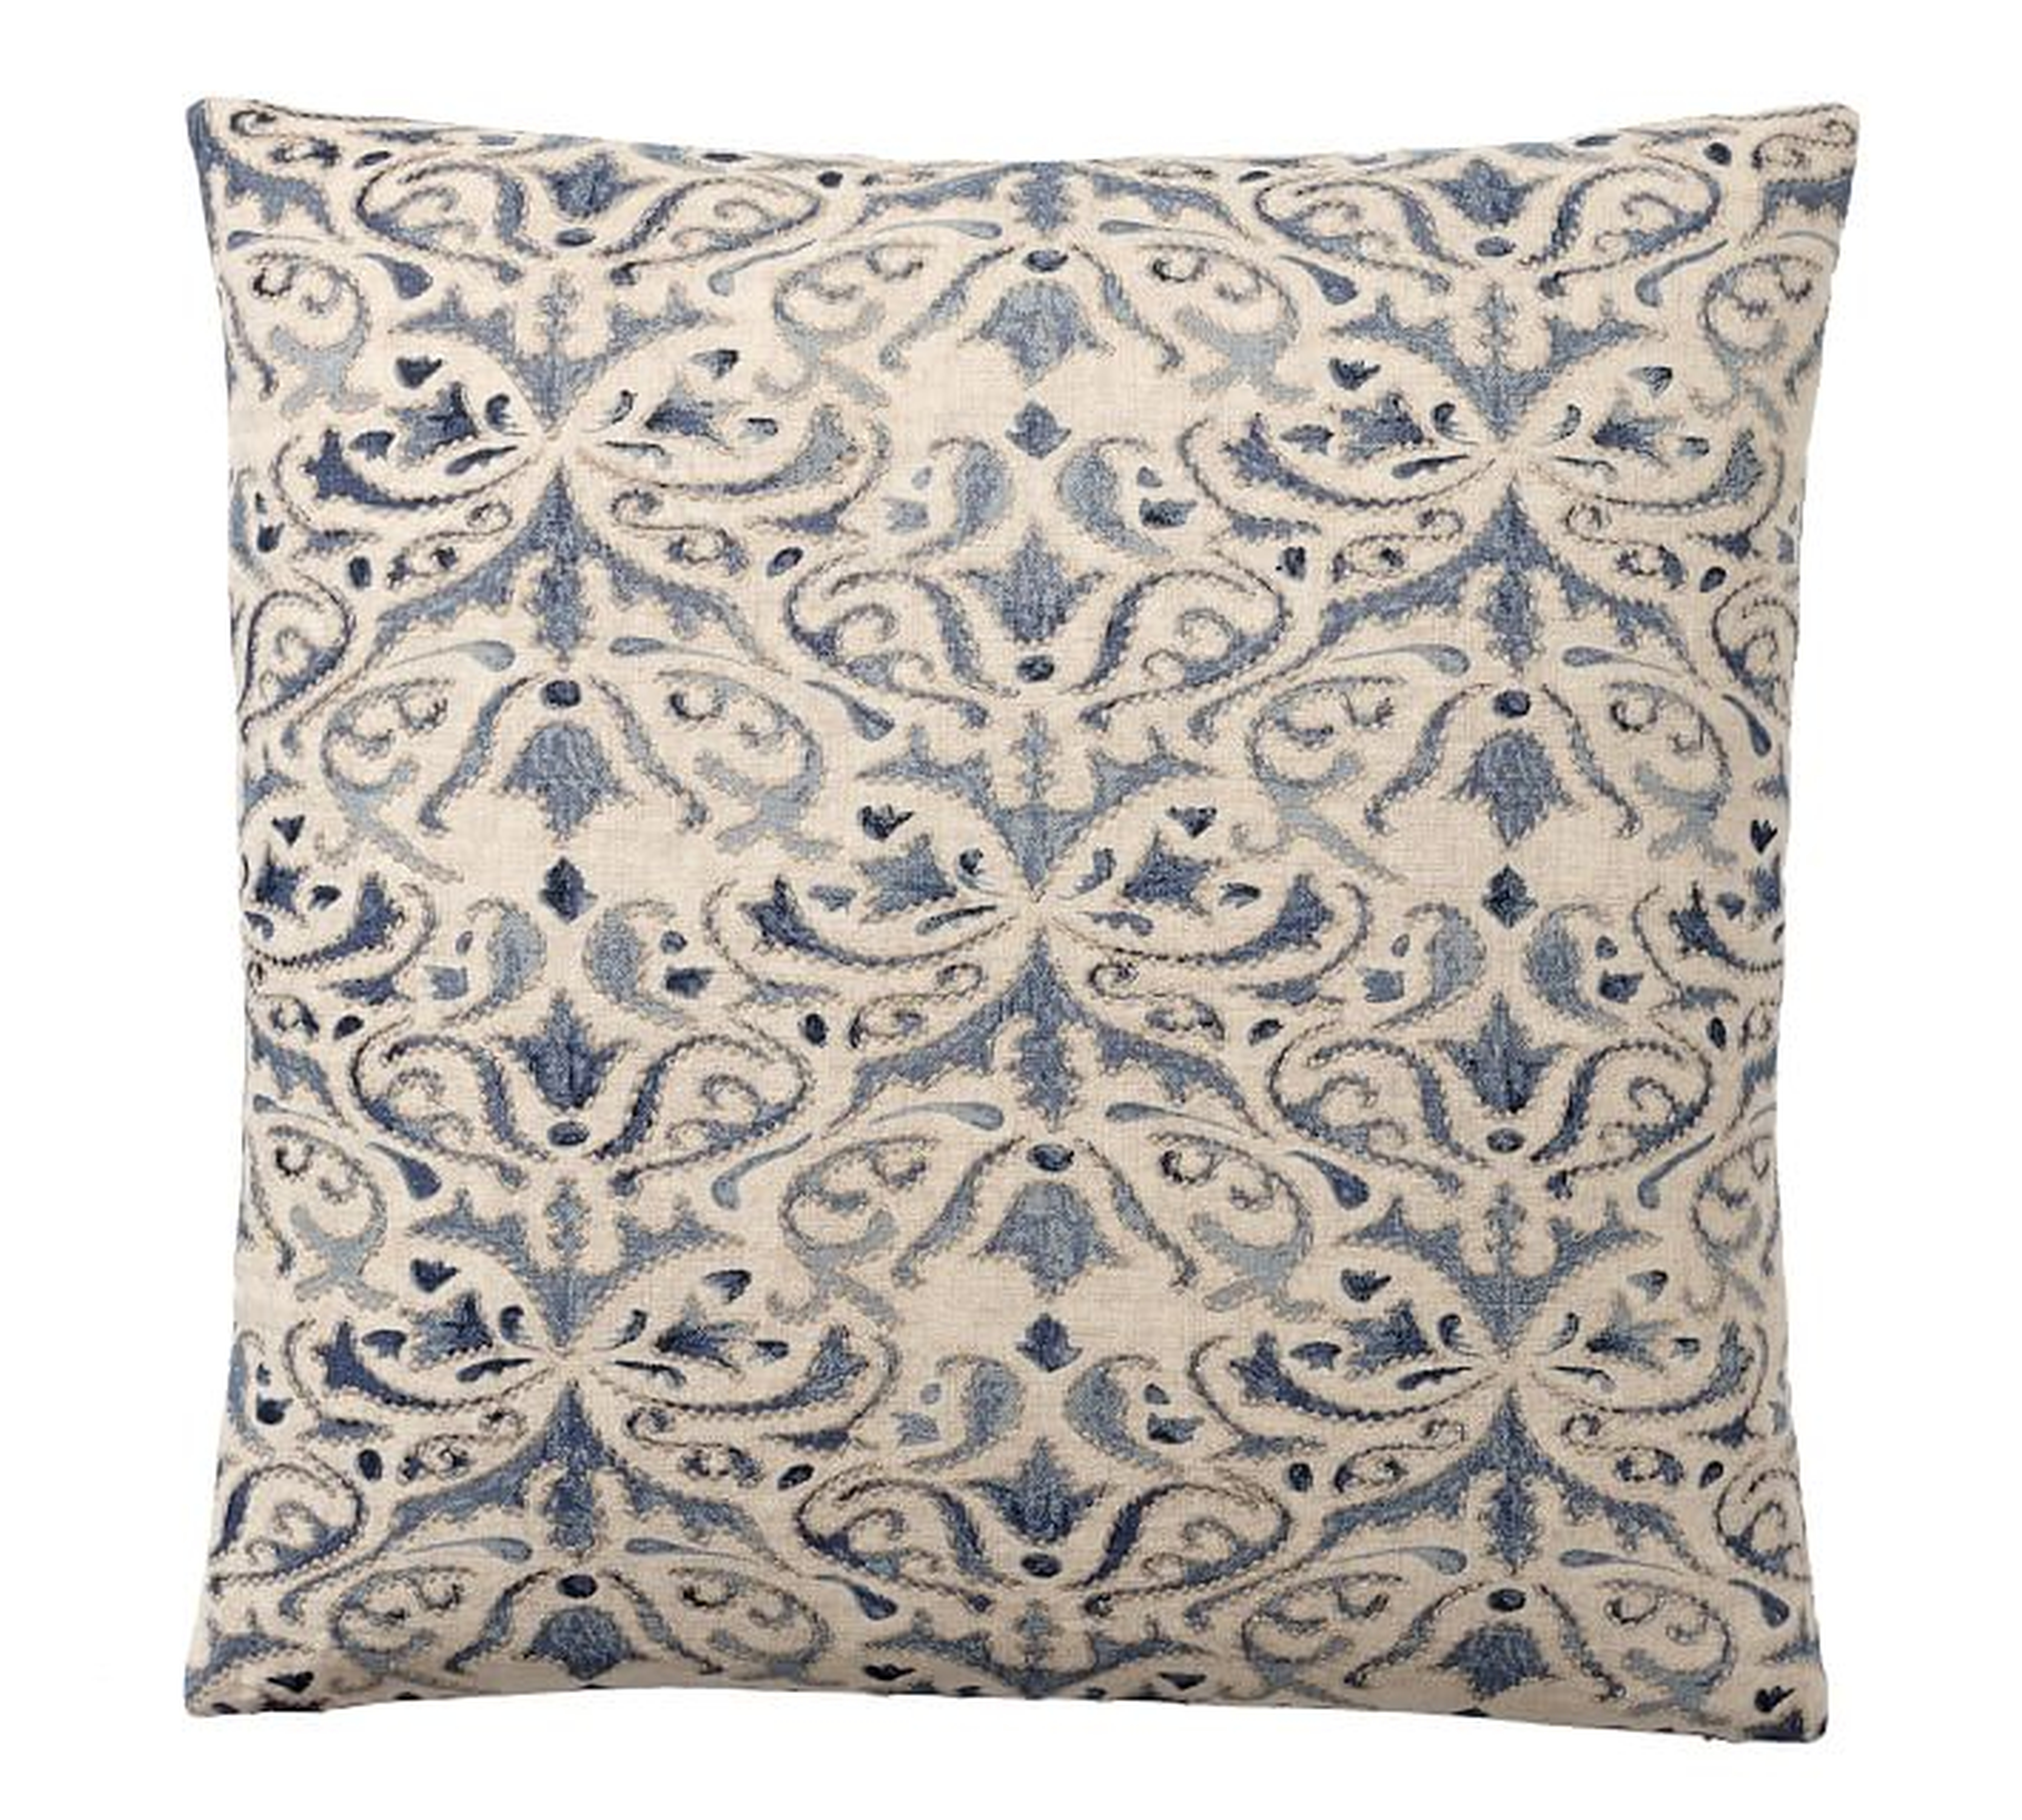 Reilley Linen Embroidered Pillow Covers - Pottery Barn